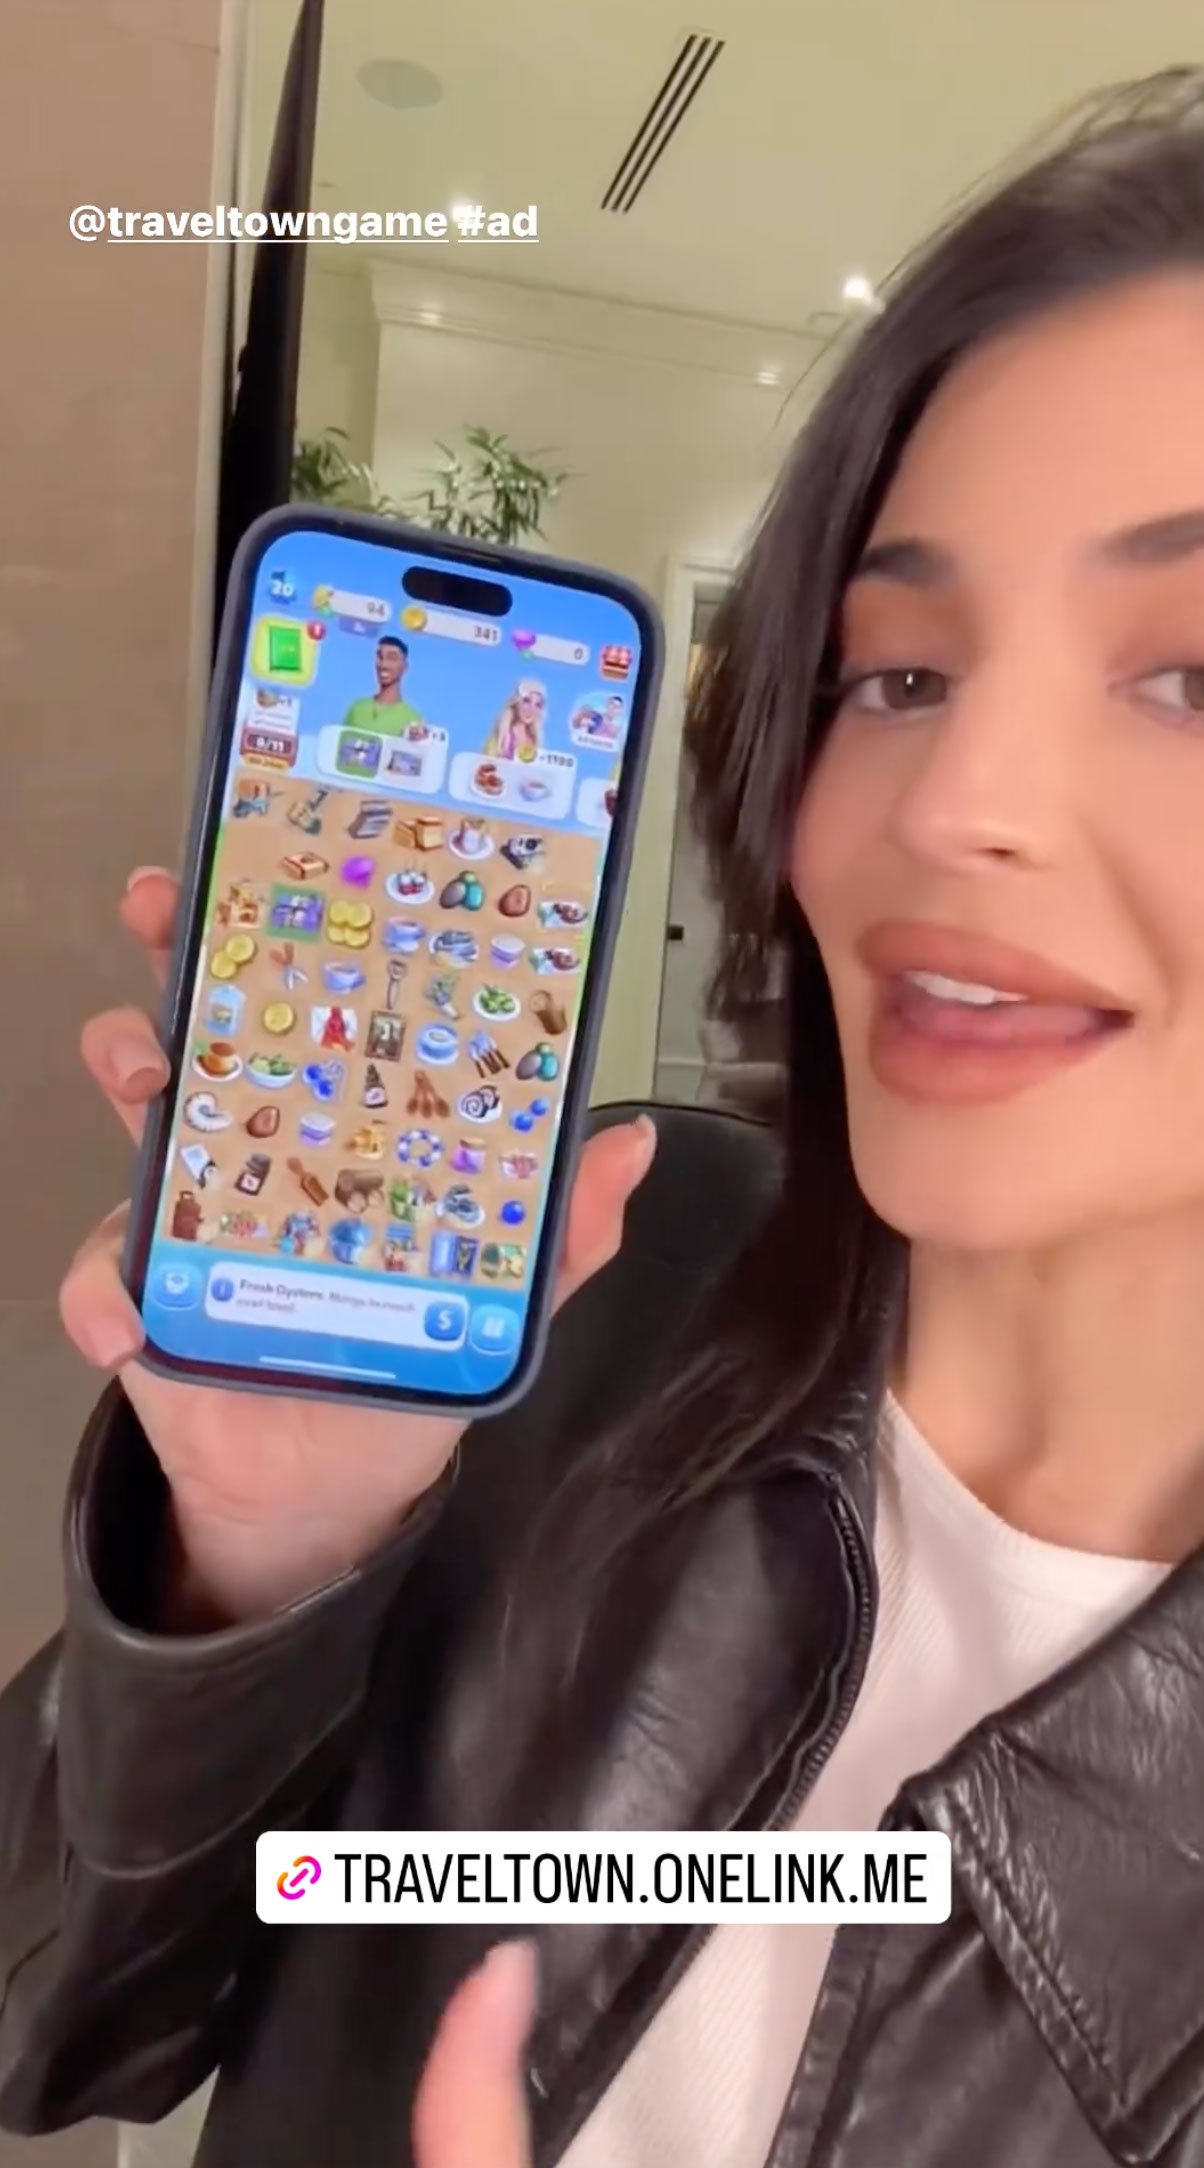 Kylie was advertising a game on her social media